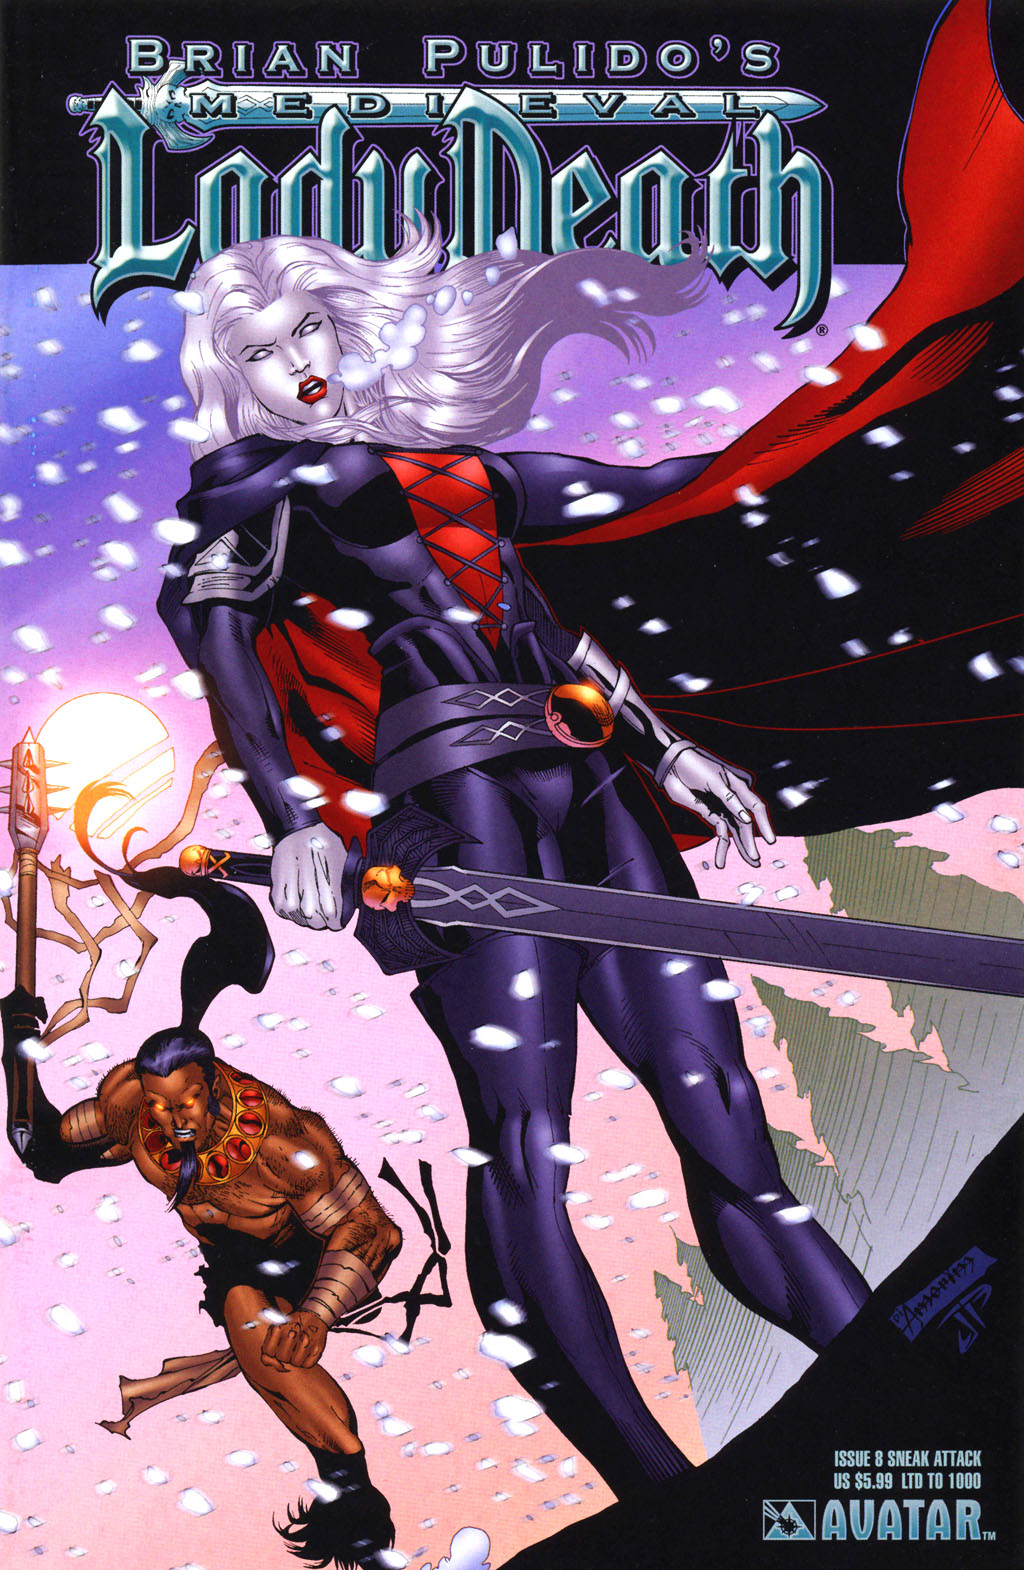 Read online Brian Pulido's Medieval Lady Death comic -  Issue #8 - 1